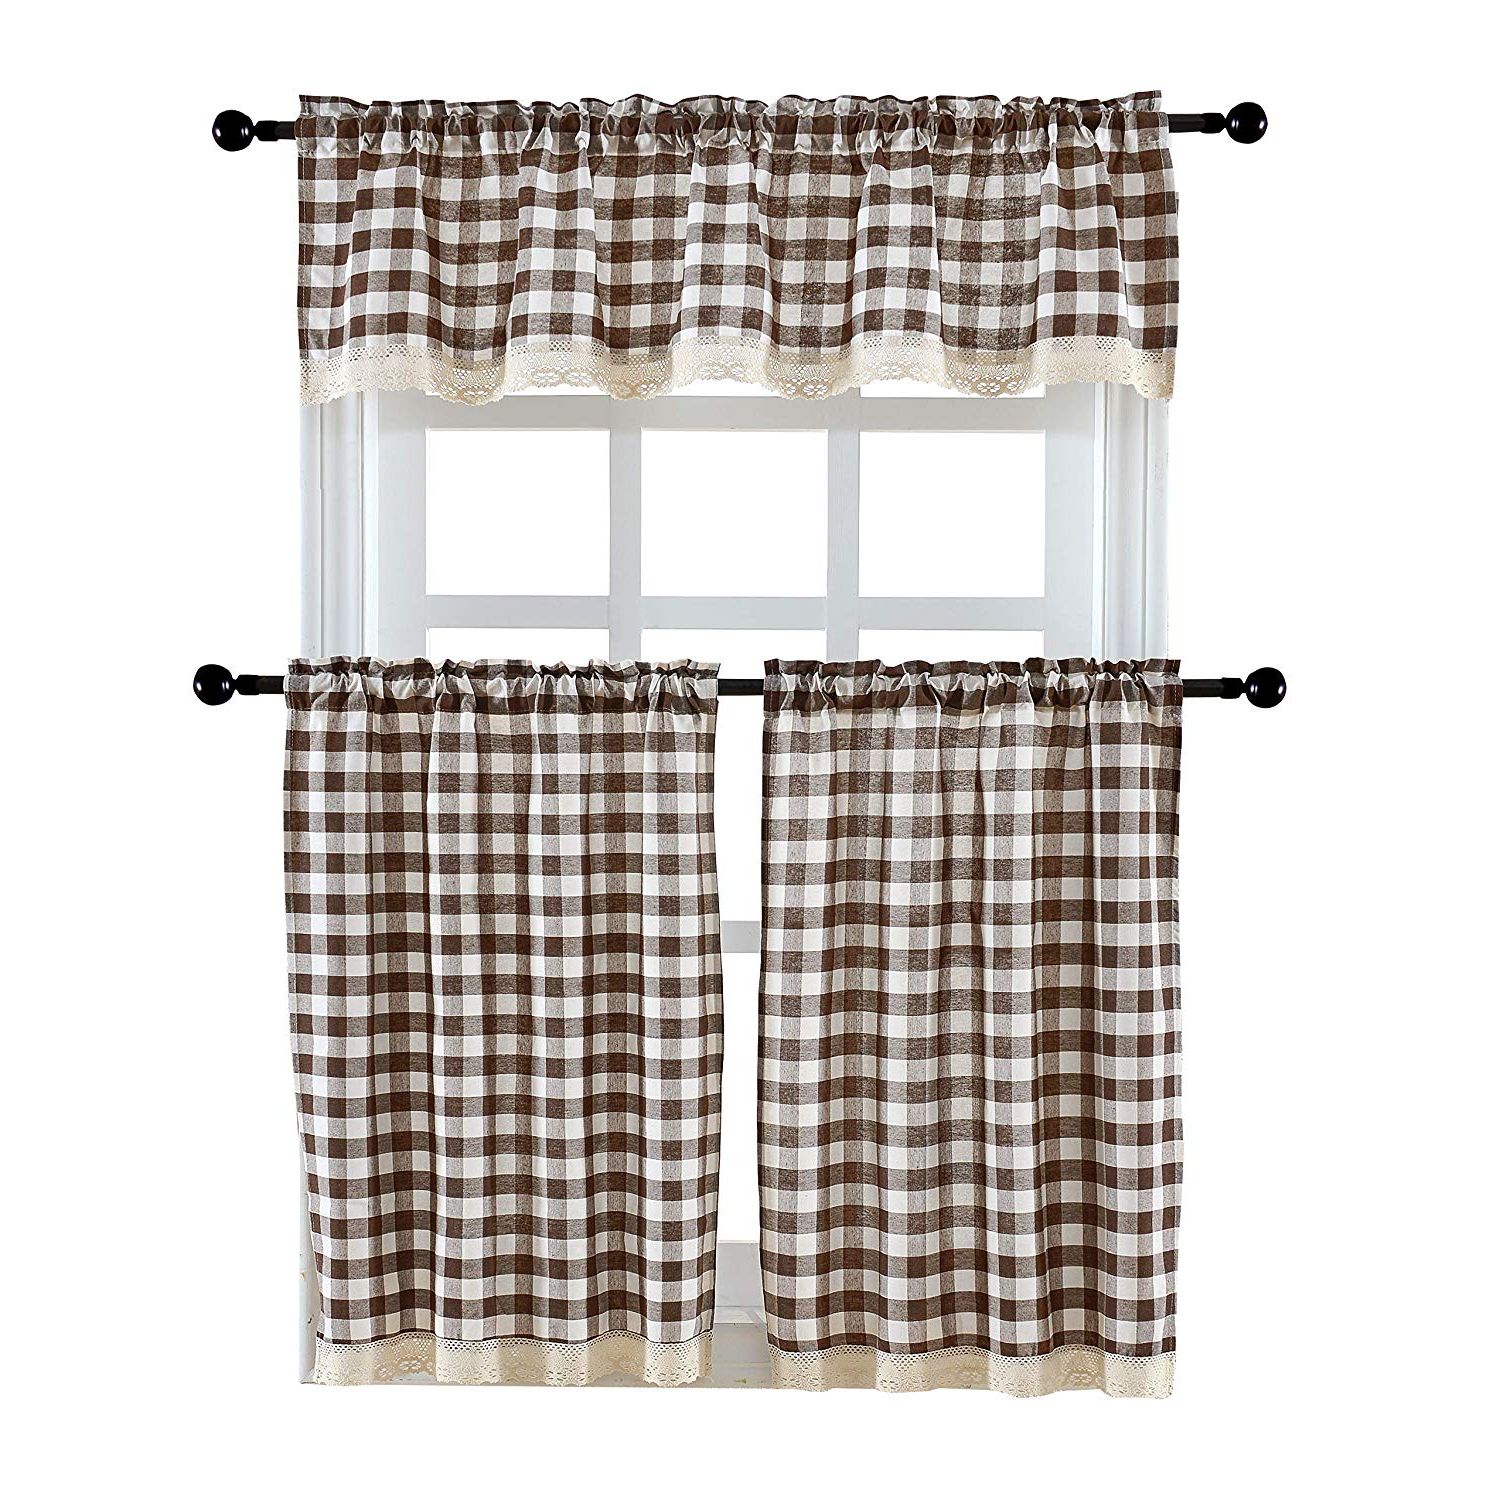 3 Pieces Kitchen Curtain Tier And Valance Set Checkered Pertaining To Current Cotton Blend Grey Kitchen Curtain Tiers (View 15 of 20)